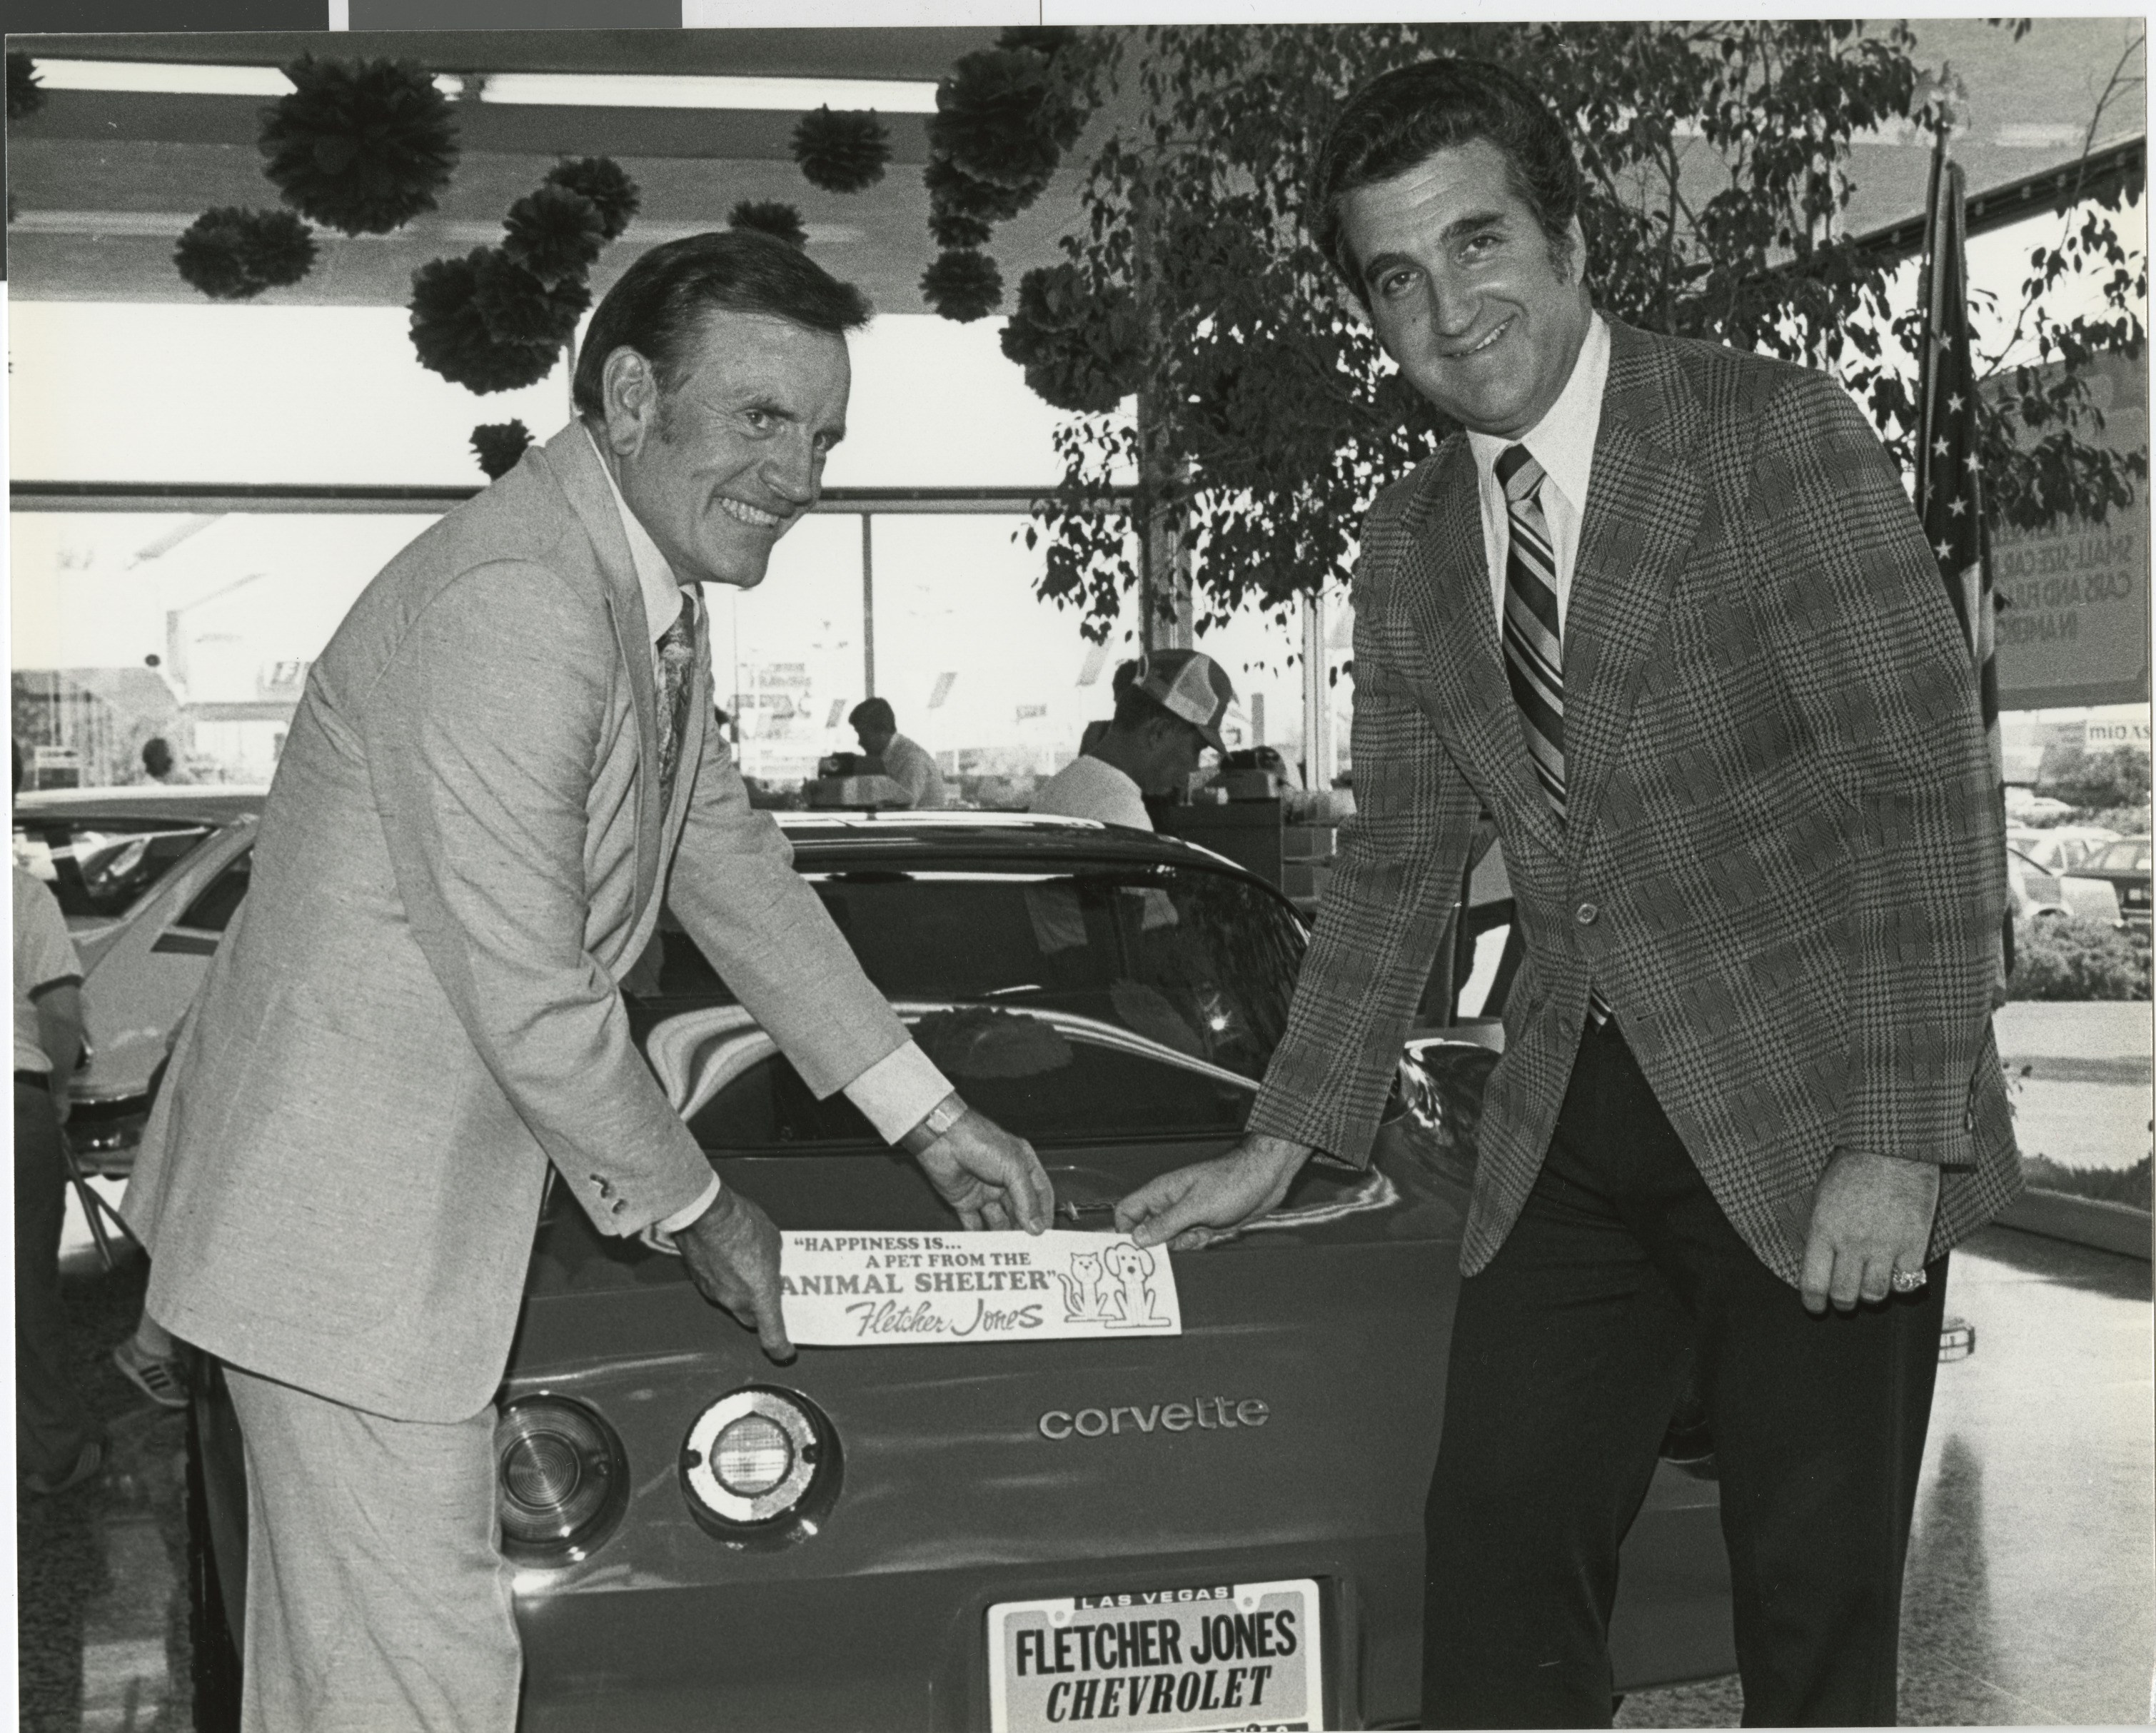 Photograph of Ron Lurie placing a bumper sticker for an animal shelter on a Corvette at Fletcher Jones car dealership